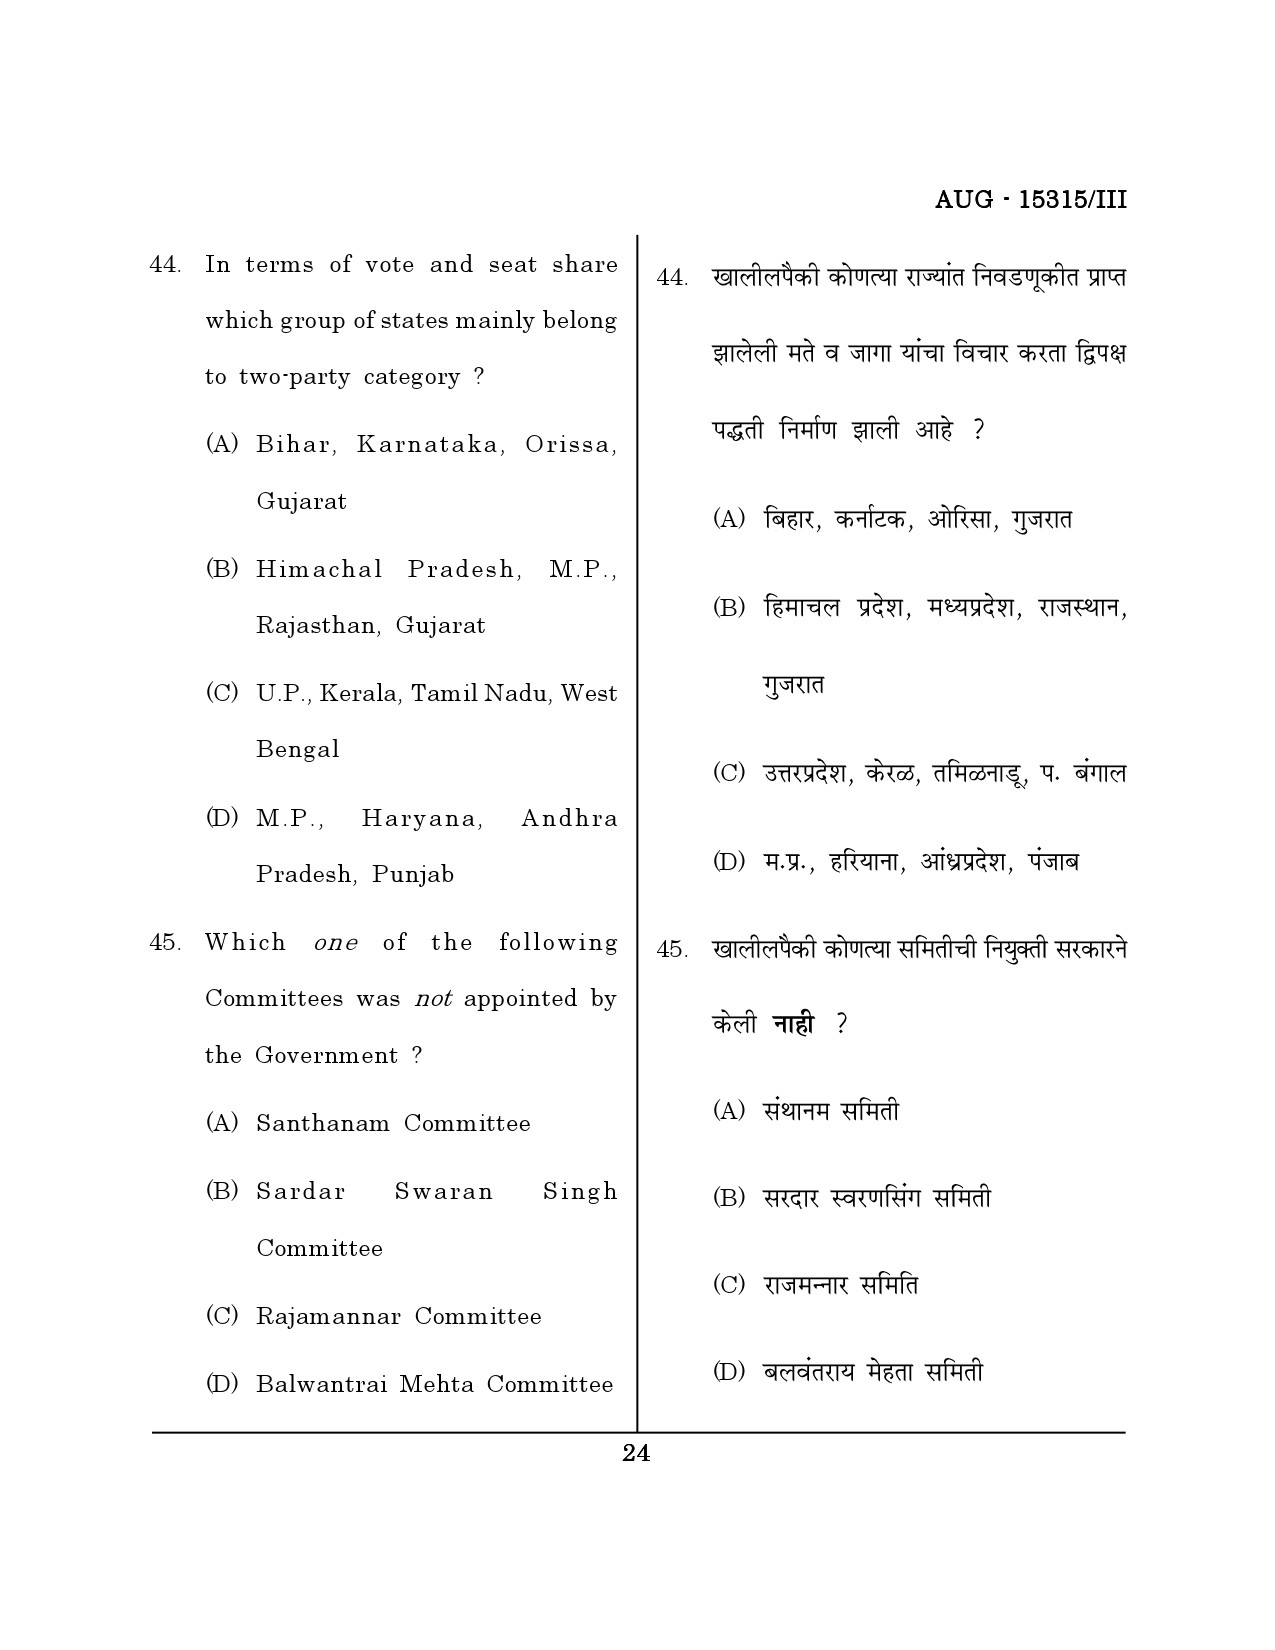 Maharashtra SET Political Science Question Paper III August 2015 23